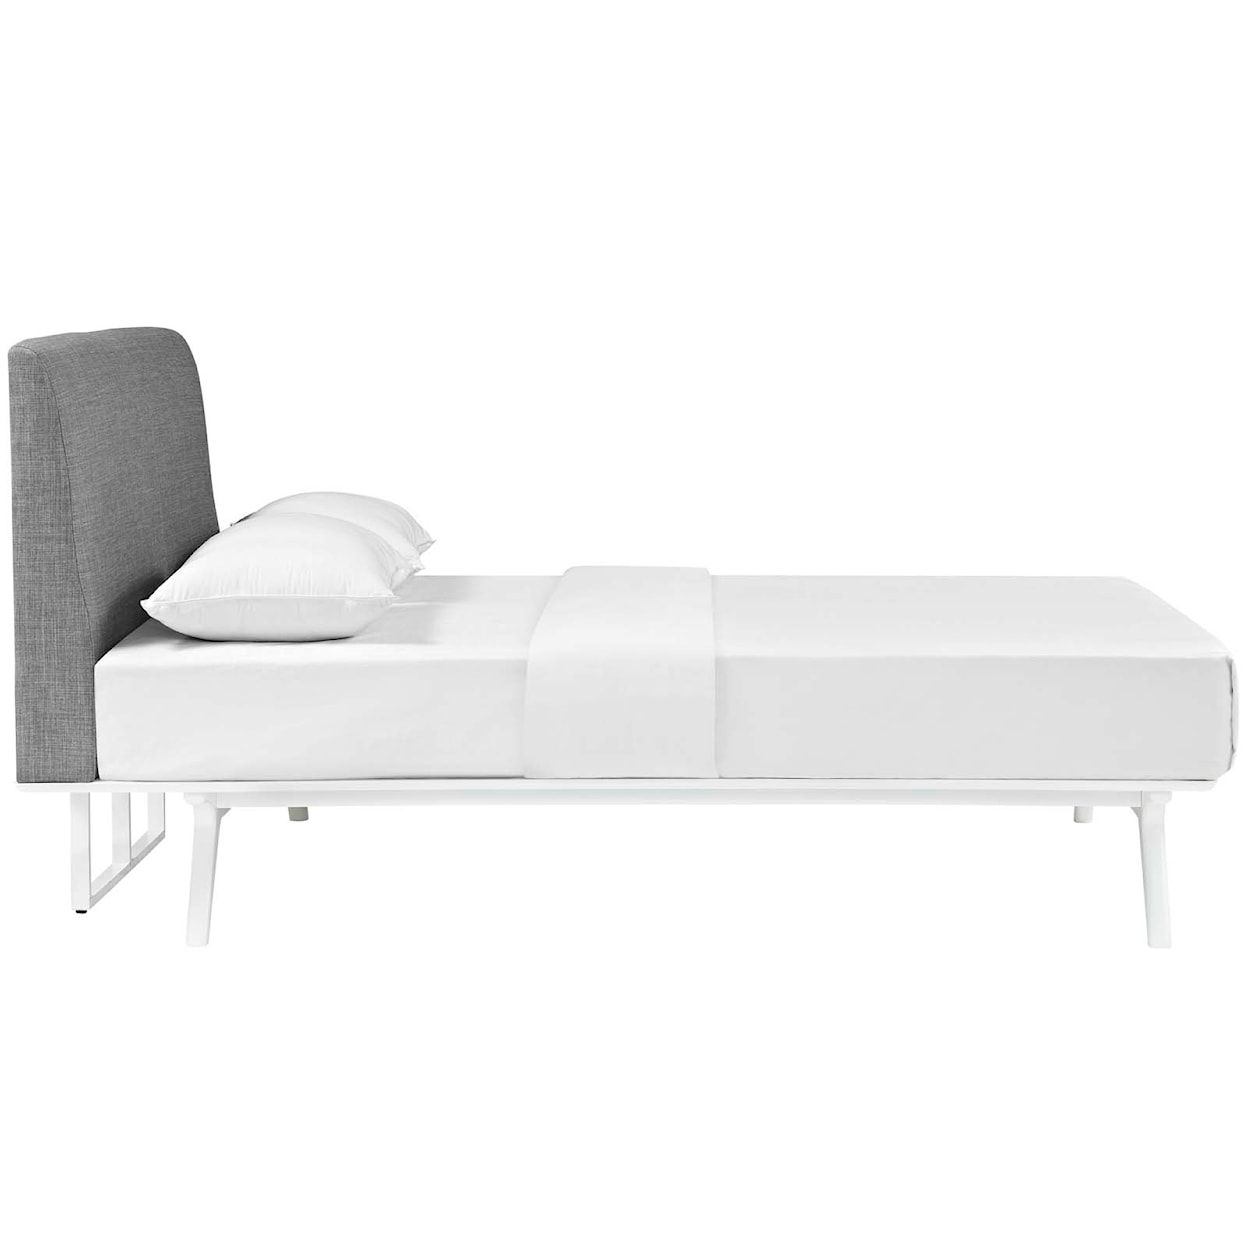 Modway Tracy King Bed